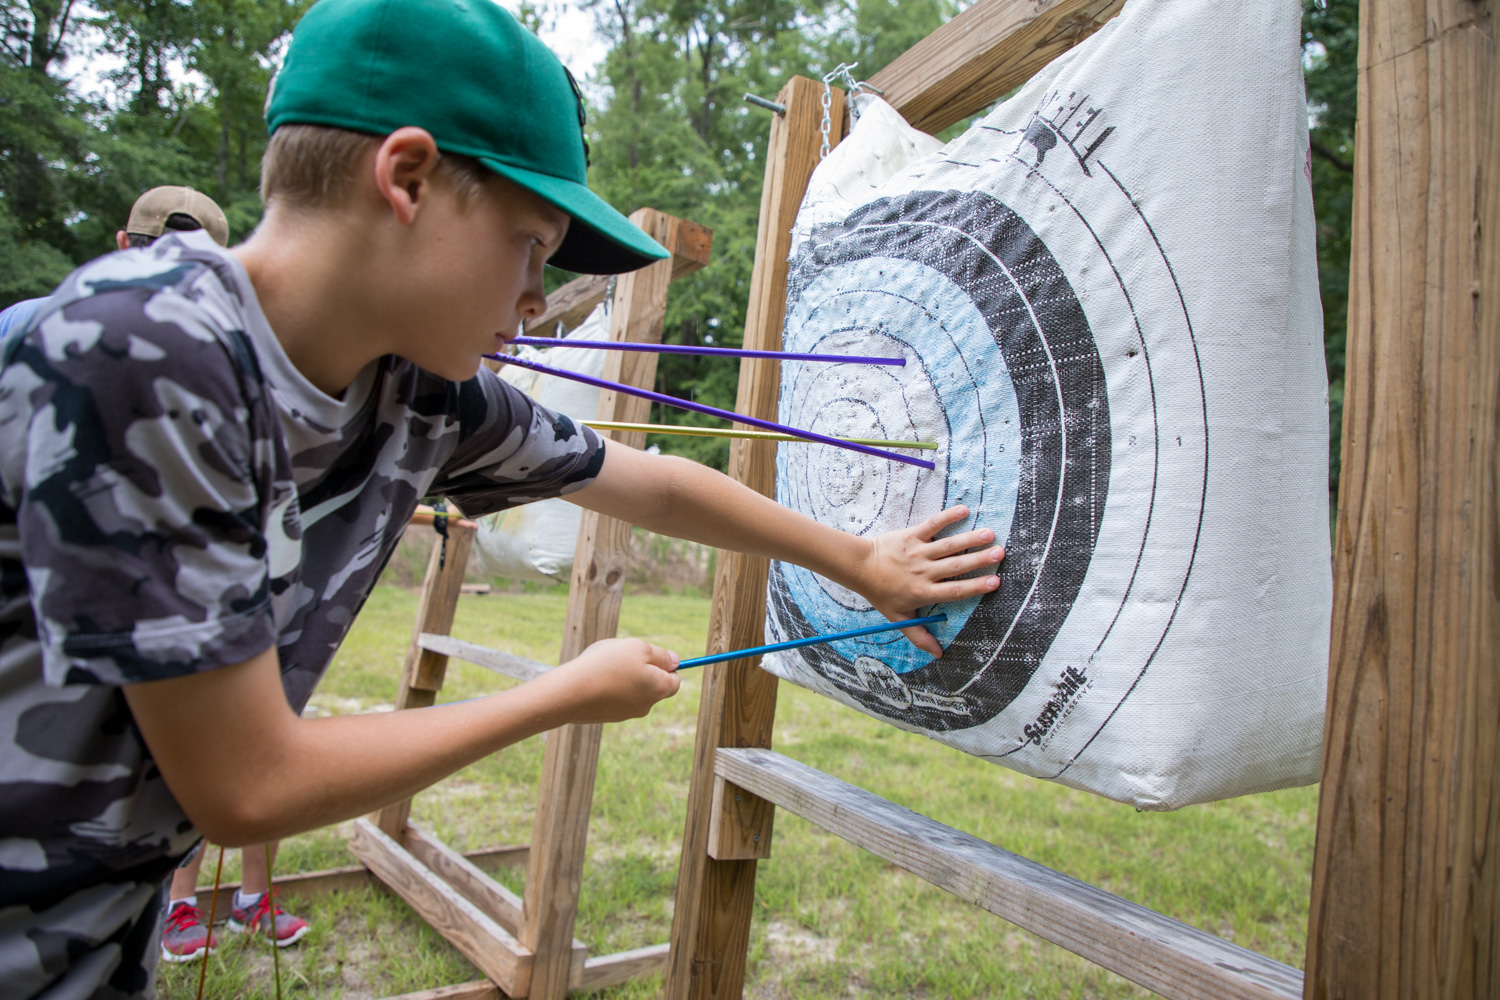 youth pulling arrows from a bag archery target